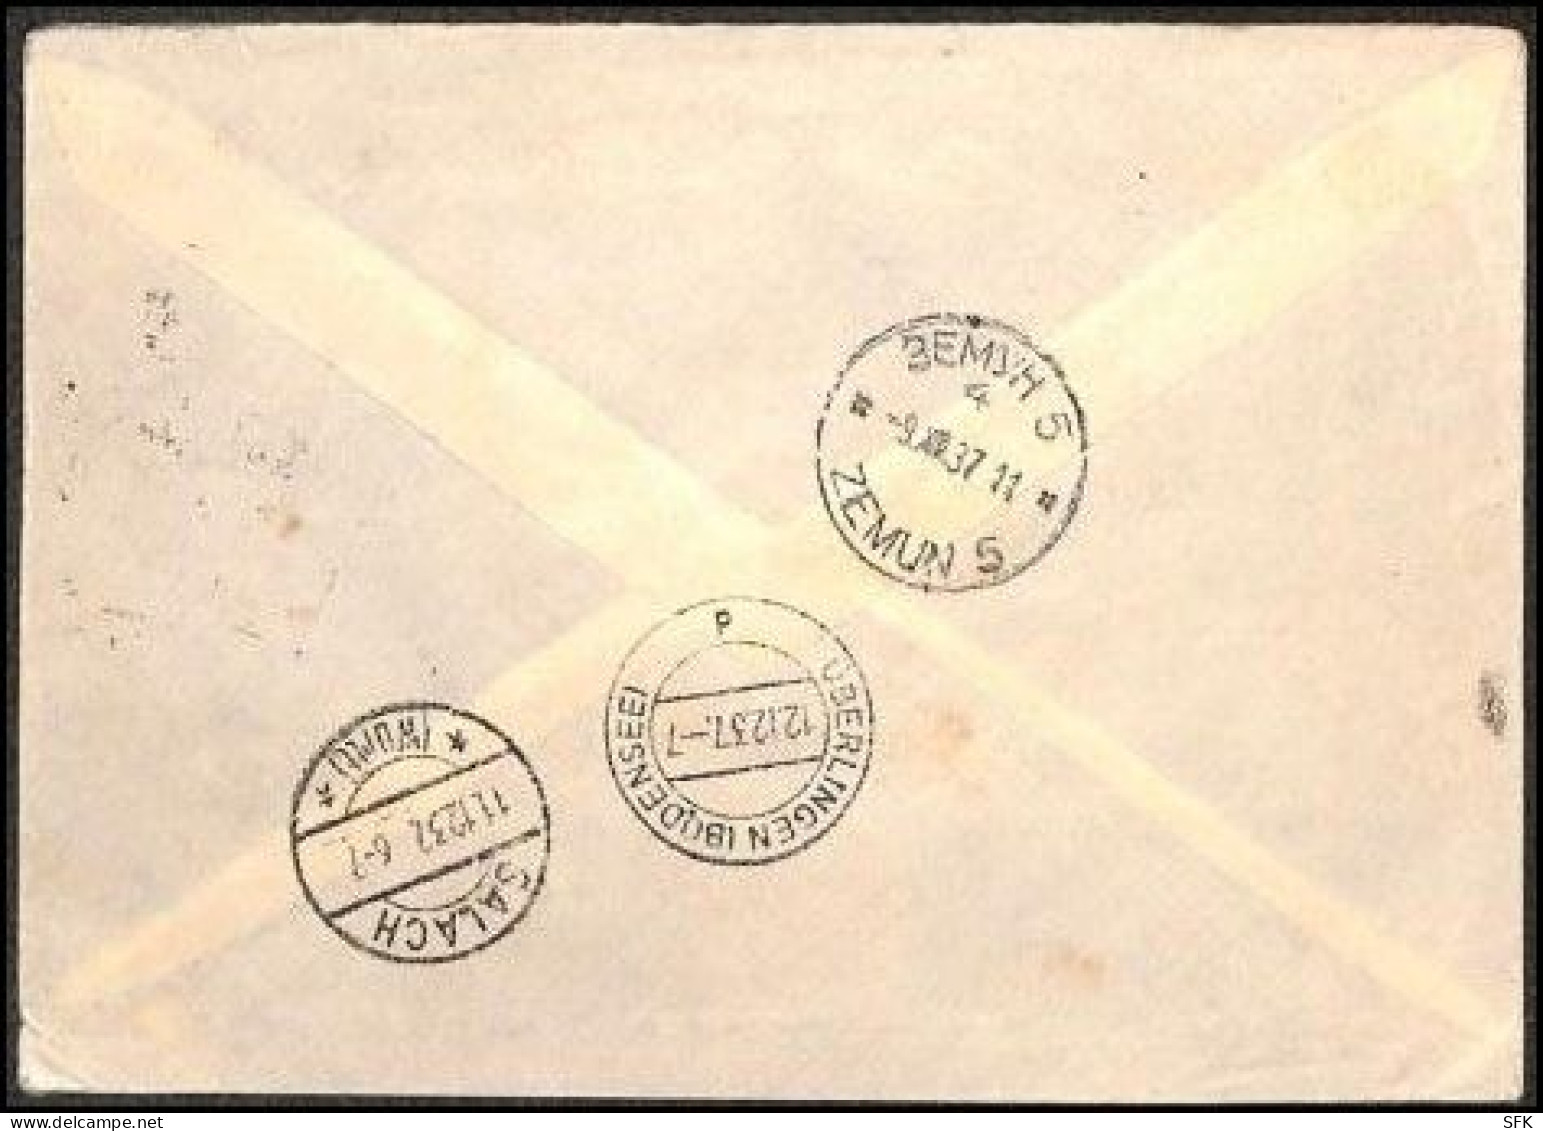 1937 Airmail Letter From Belgrade Airport Zemun 5 To Wirnterberg Sent By Lufthansa With Appropriate Franking, VF - Aéreo